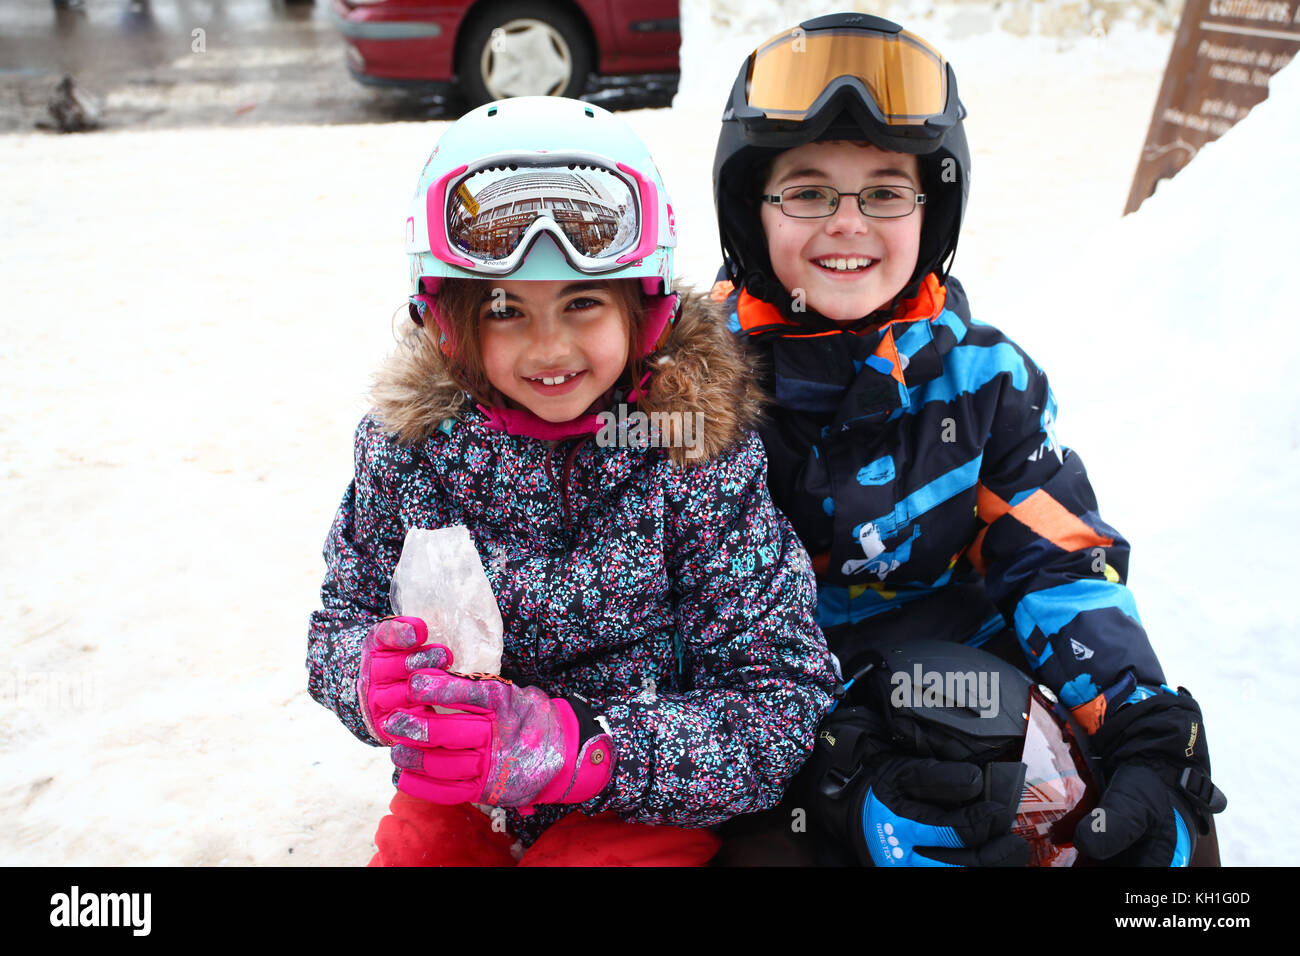 kids in the snow wearing ski suits, helmets and goggles Stock Photo